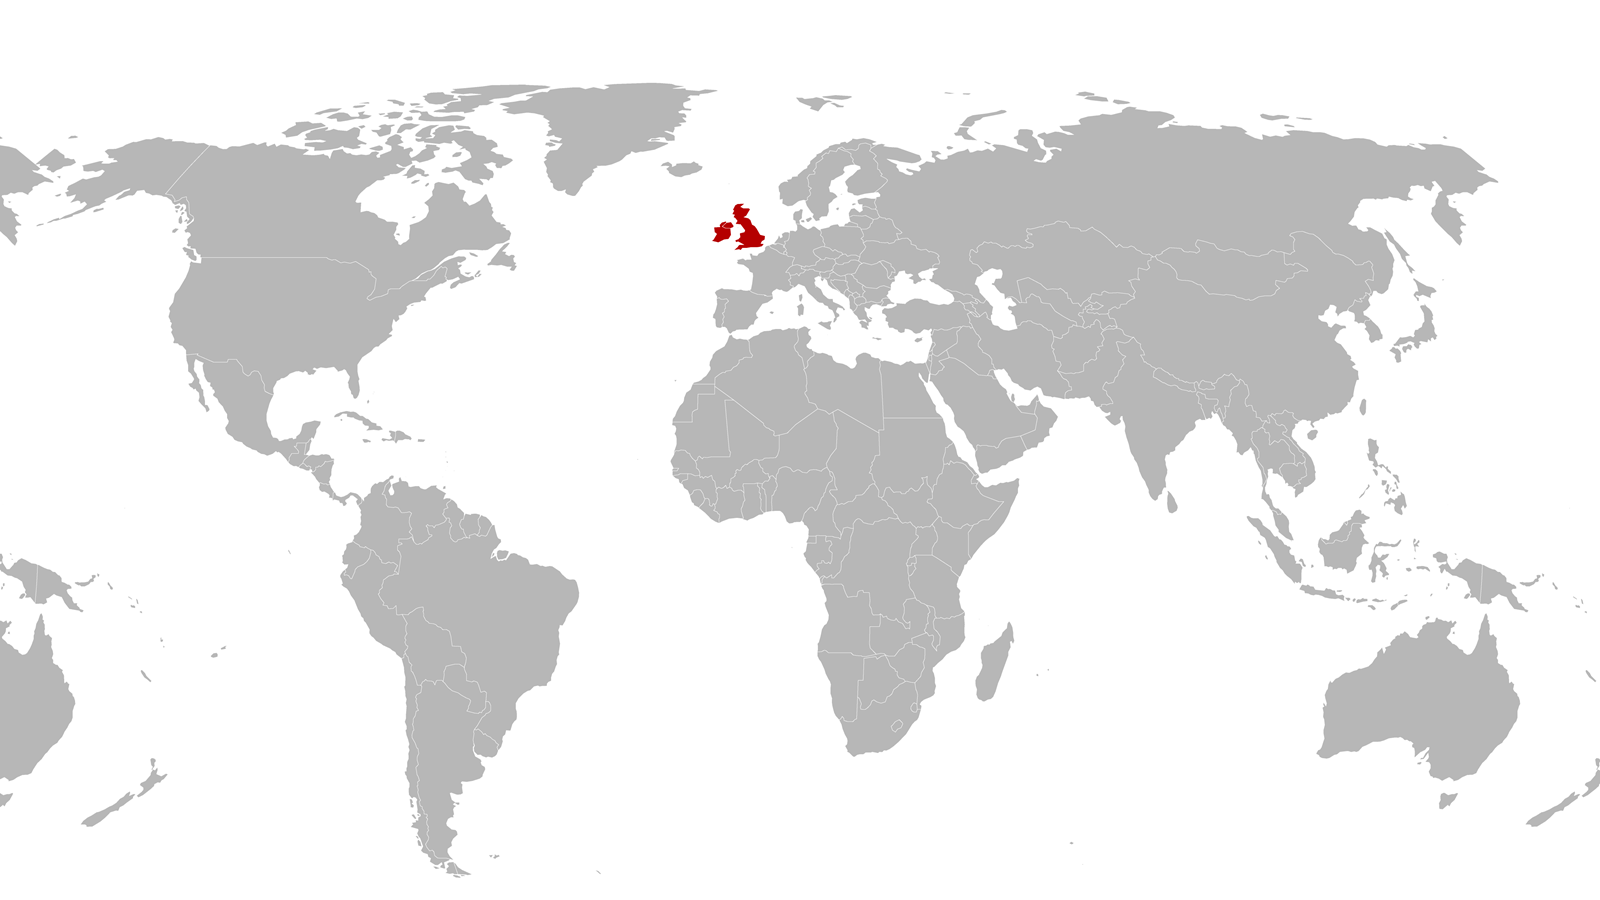 World map with centred UK and Ireland highlighted